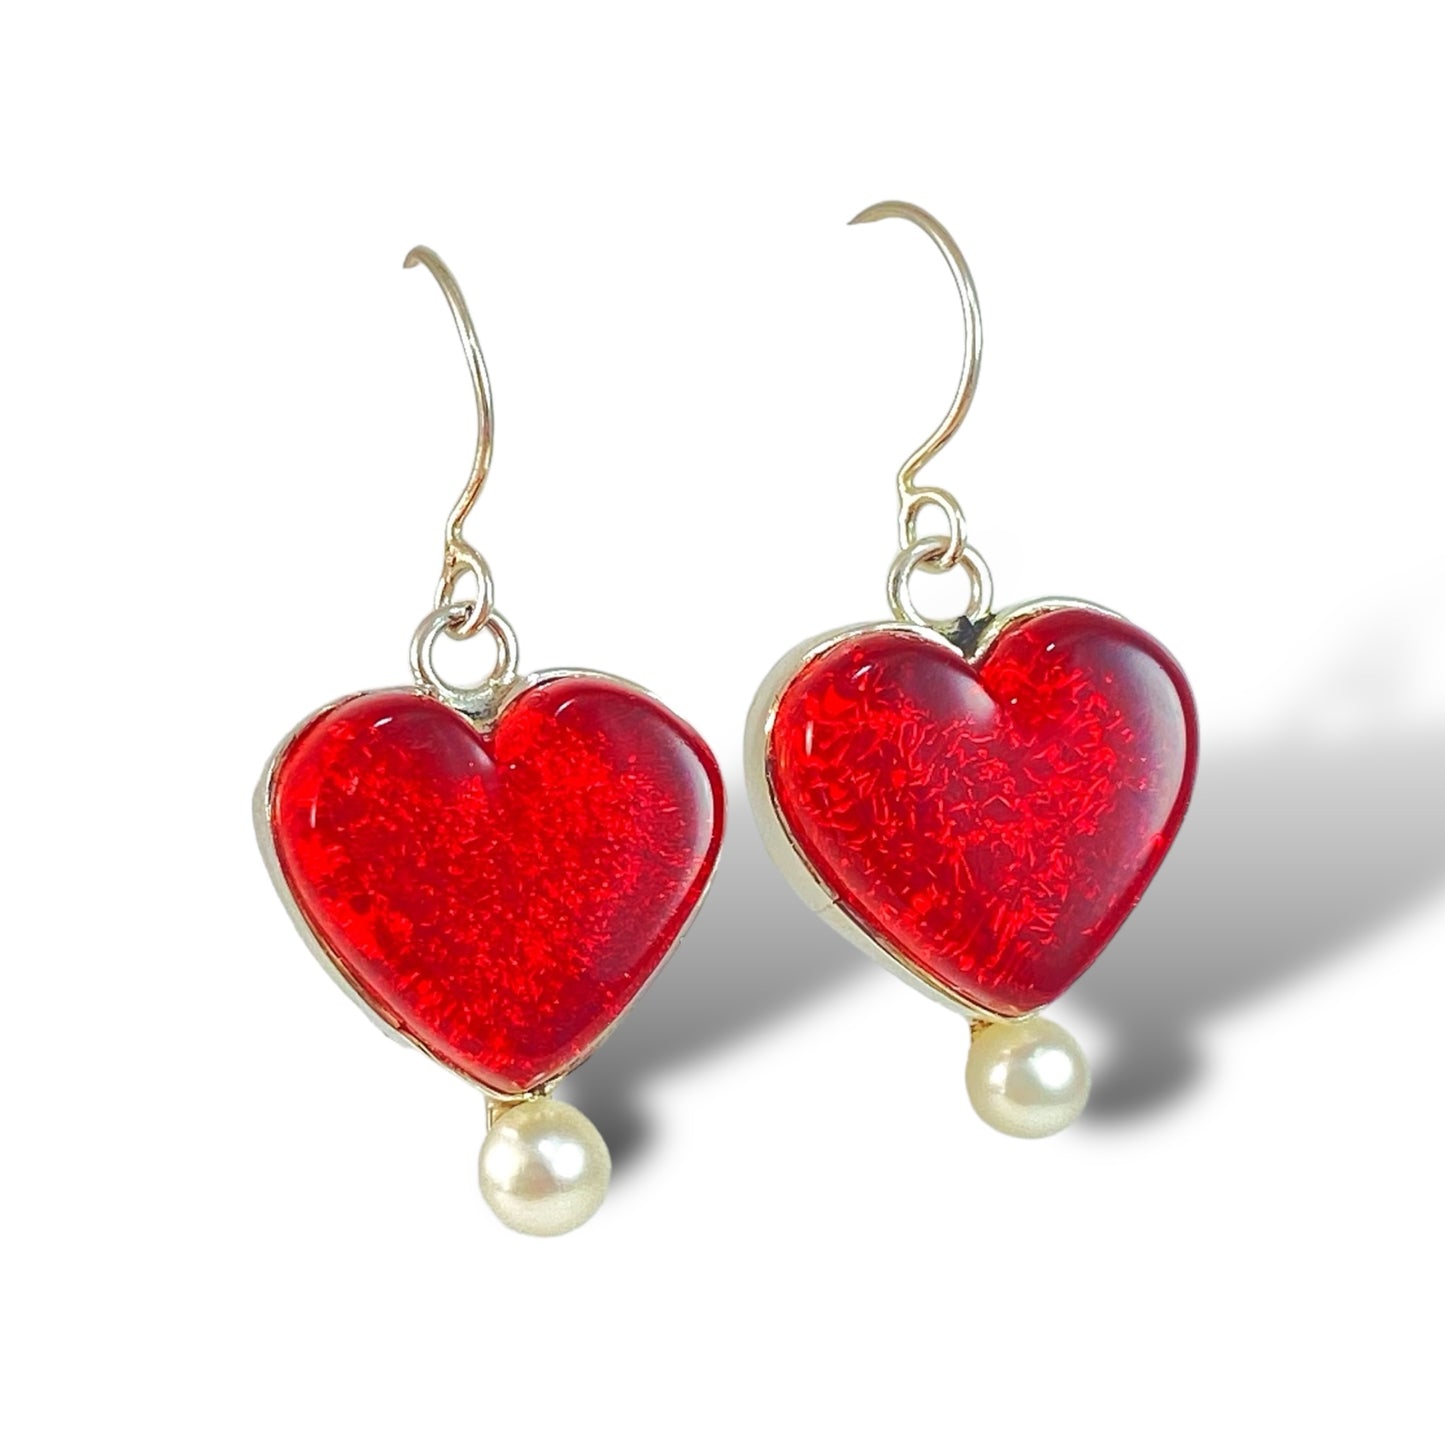 Heart Earrings with Pearl in Cherry